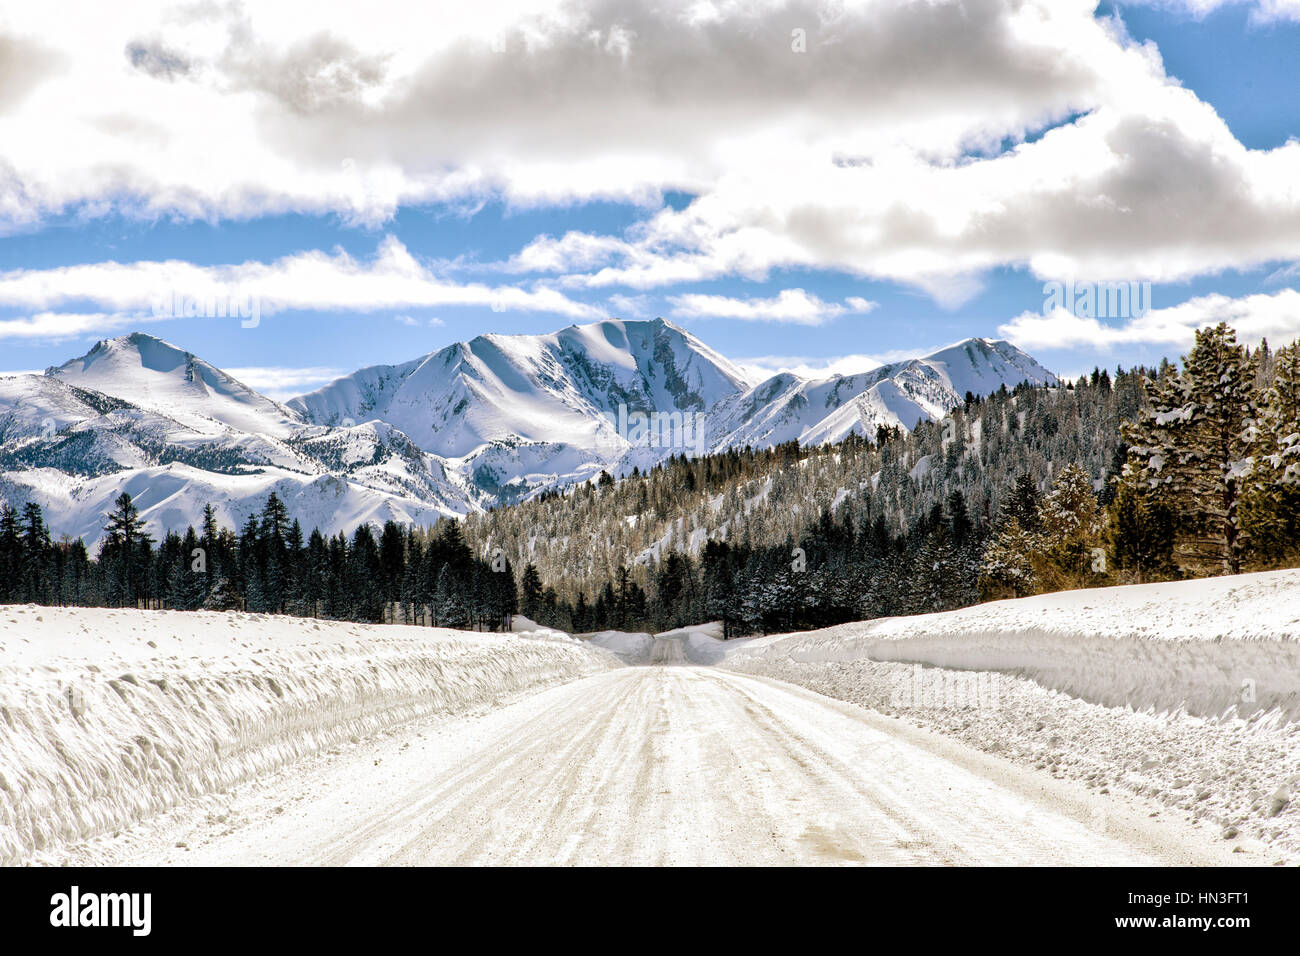 Eastern Sierra Winter High Resolution Stock Photography and Images - Alamy